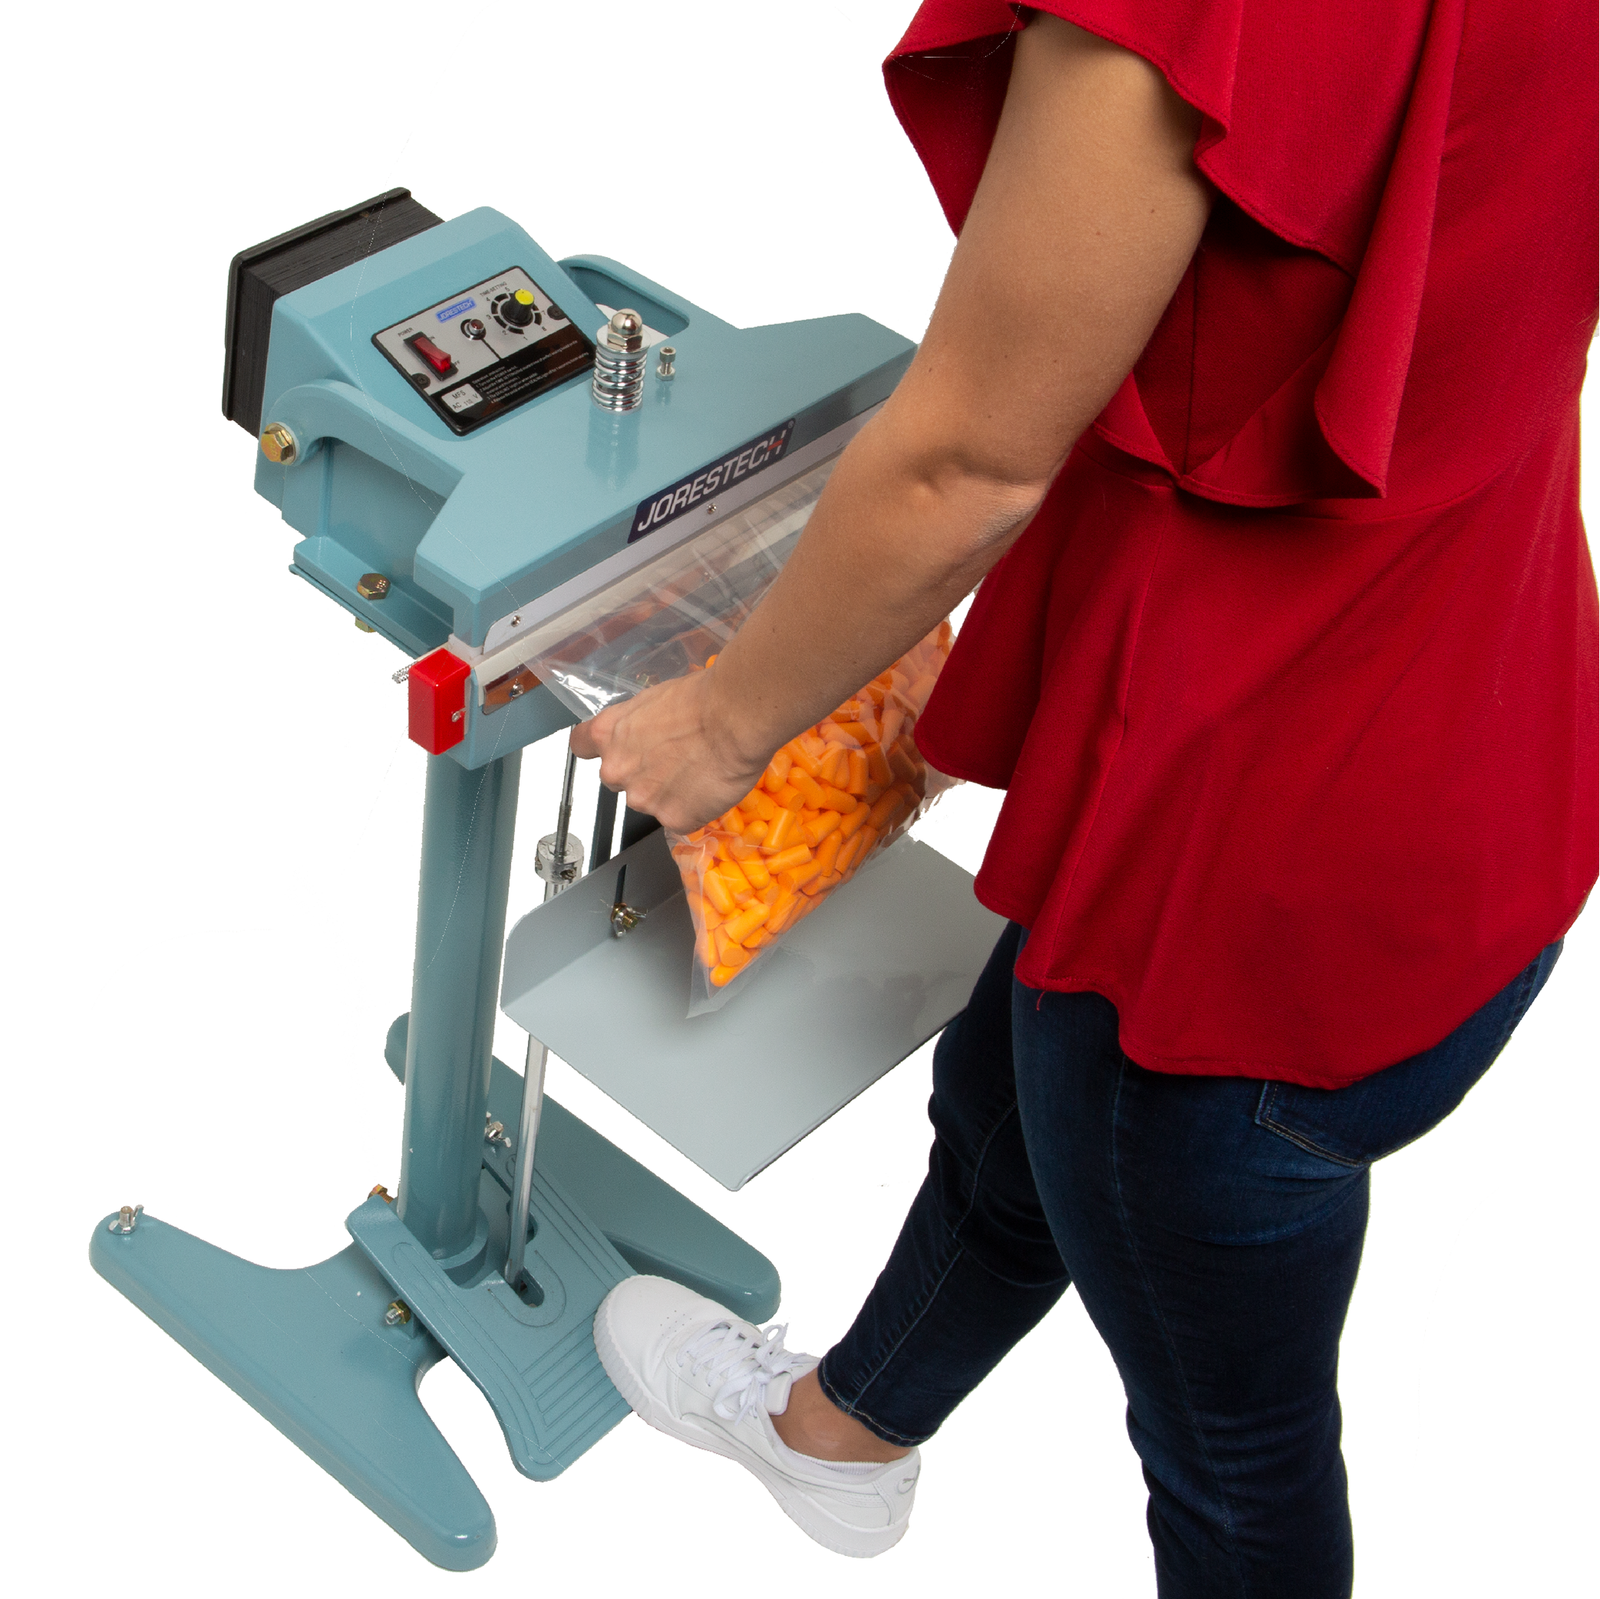 A person wearing a red shirt and jeans. She is sealing a large bag filled with earplugs using the 18 inch foot impulse bag sealer